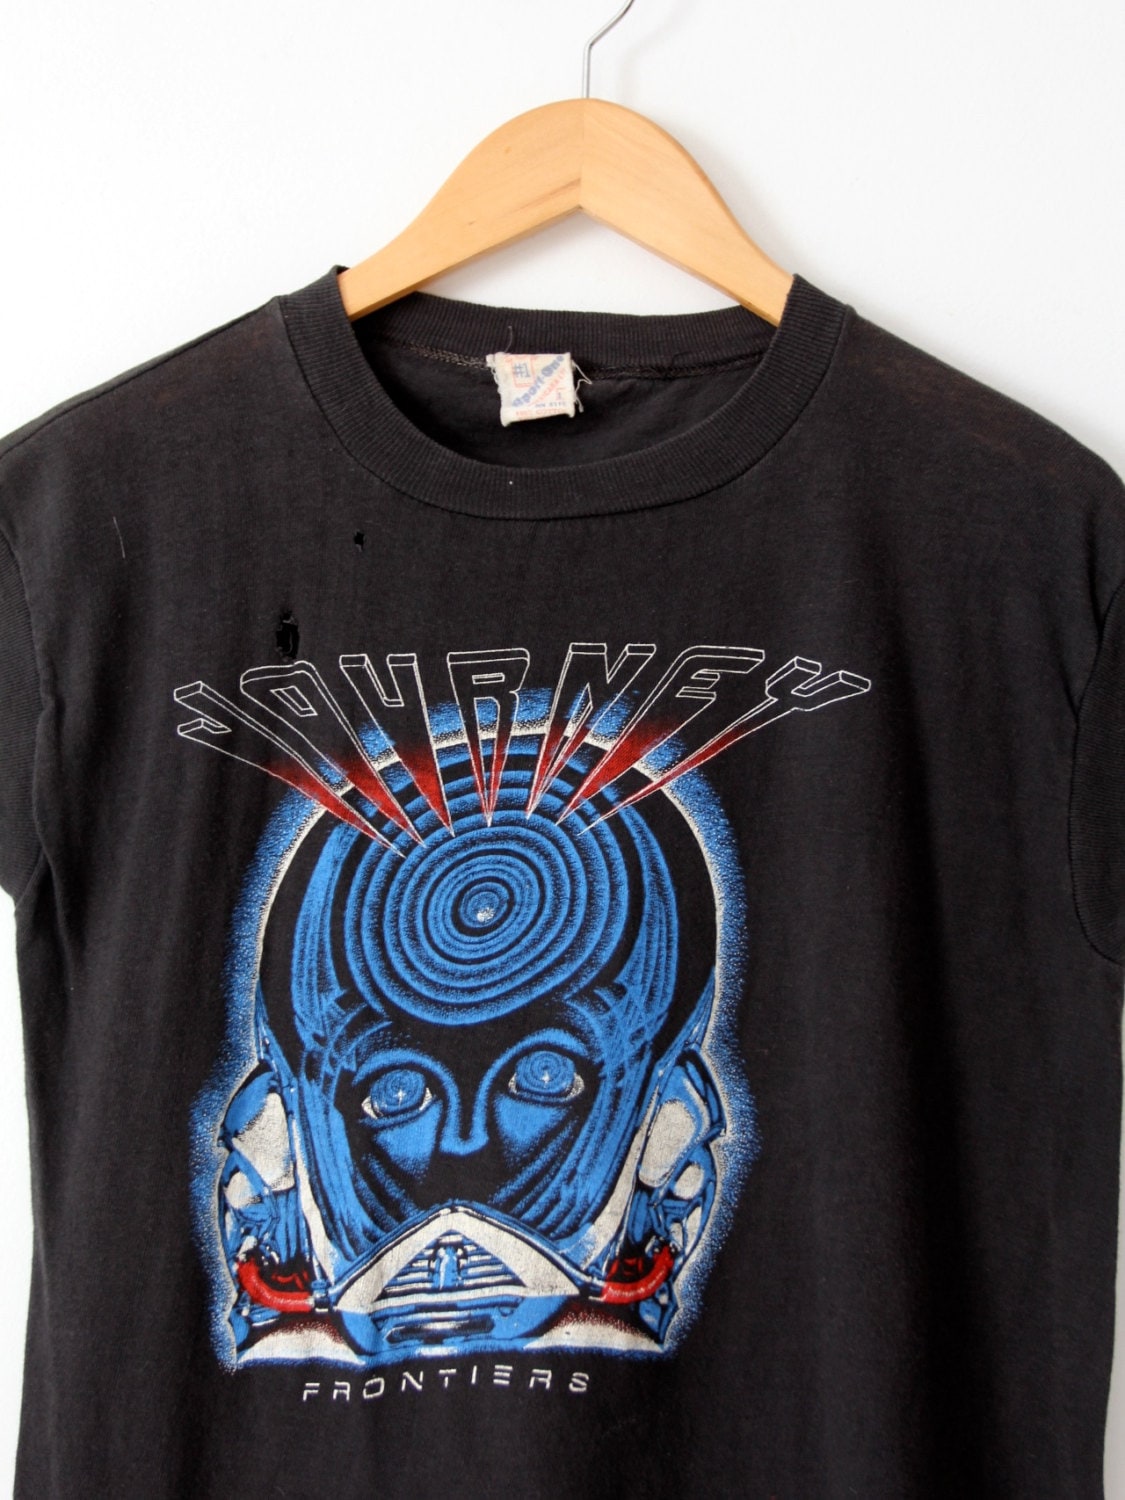 journey frontiers tour shirt